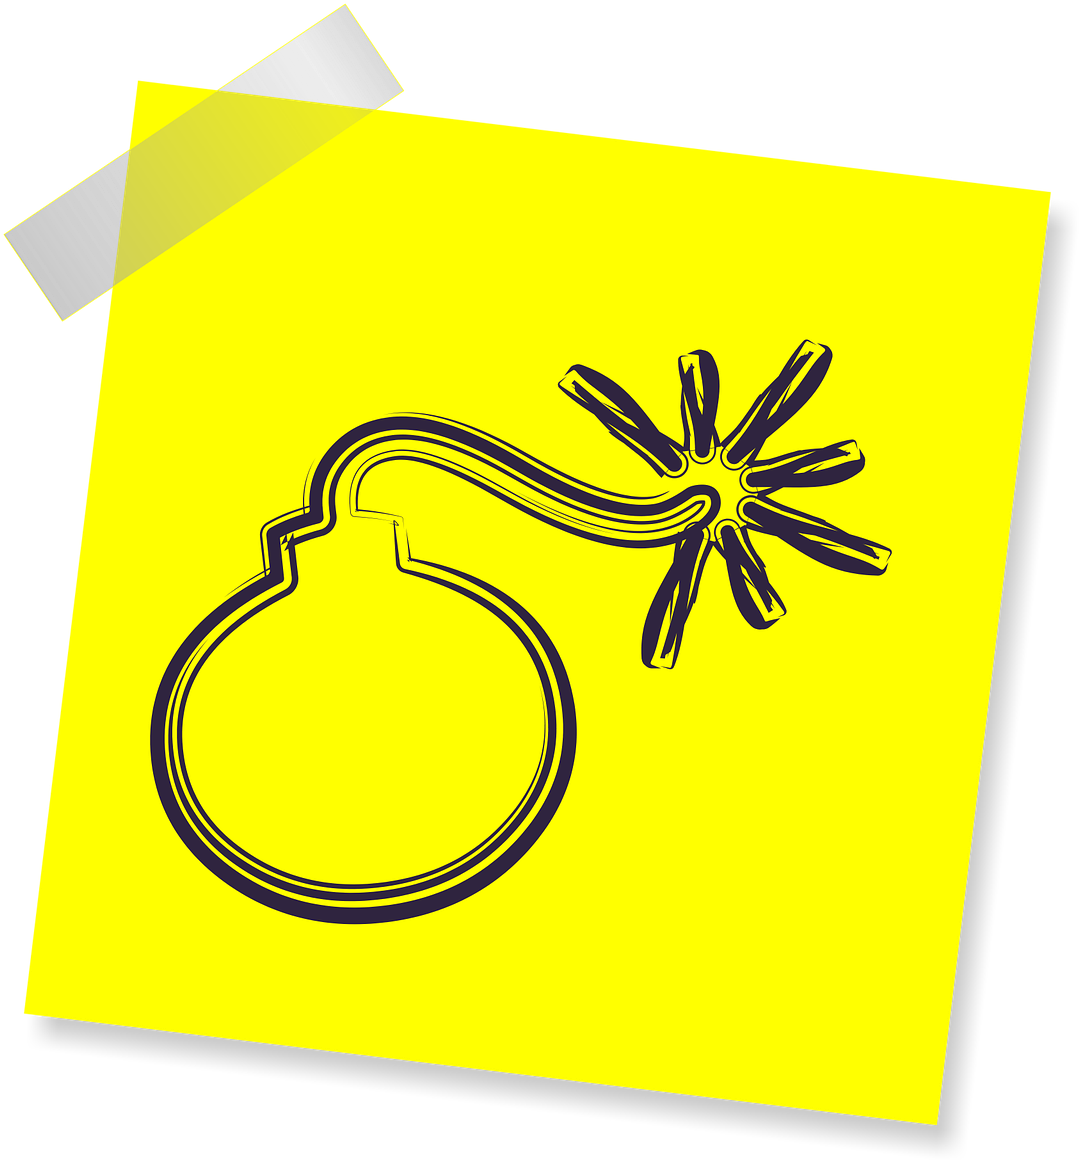 Exploding Bomb Doodle Sticky Note PNG image